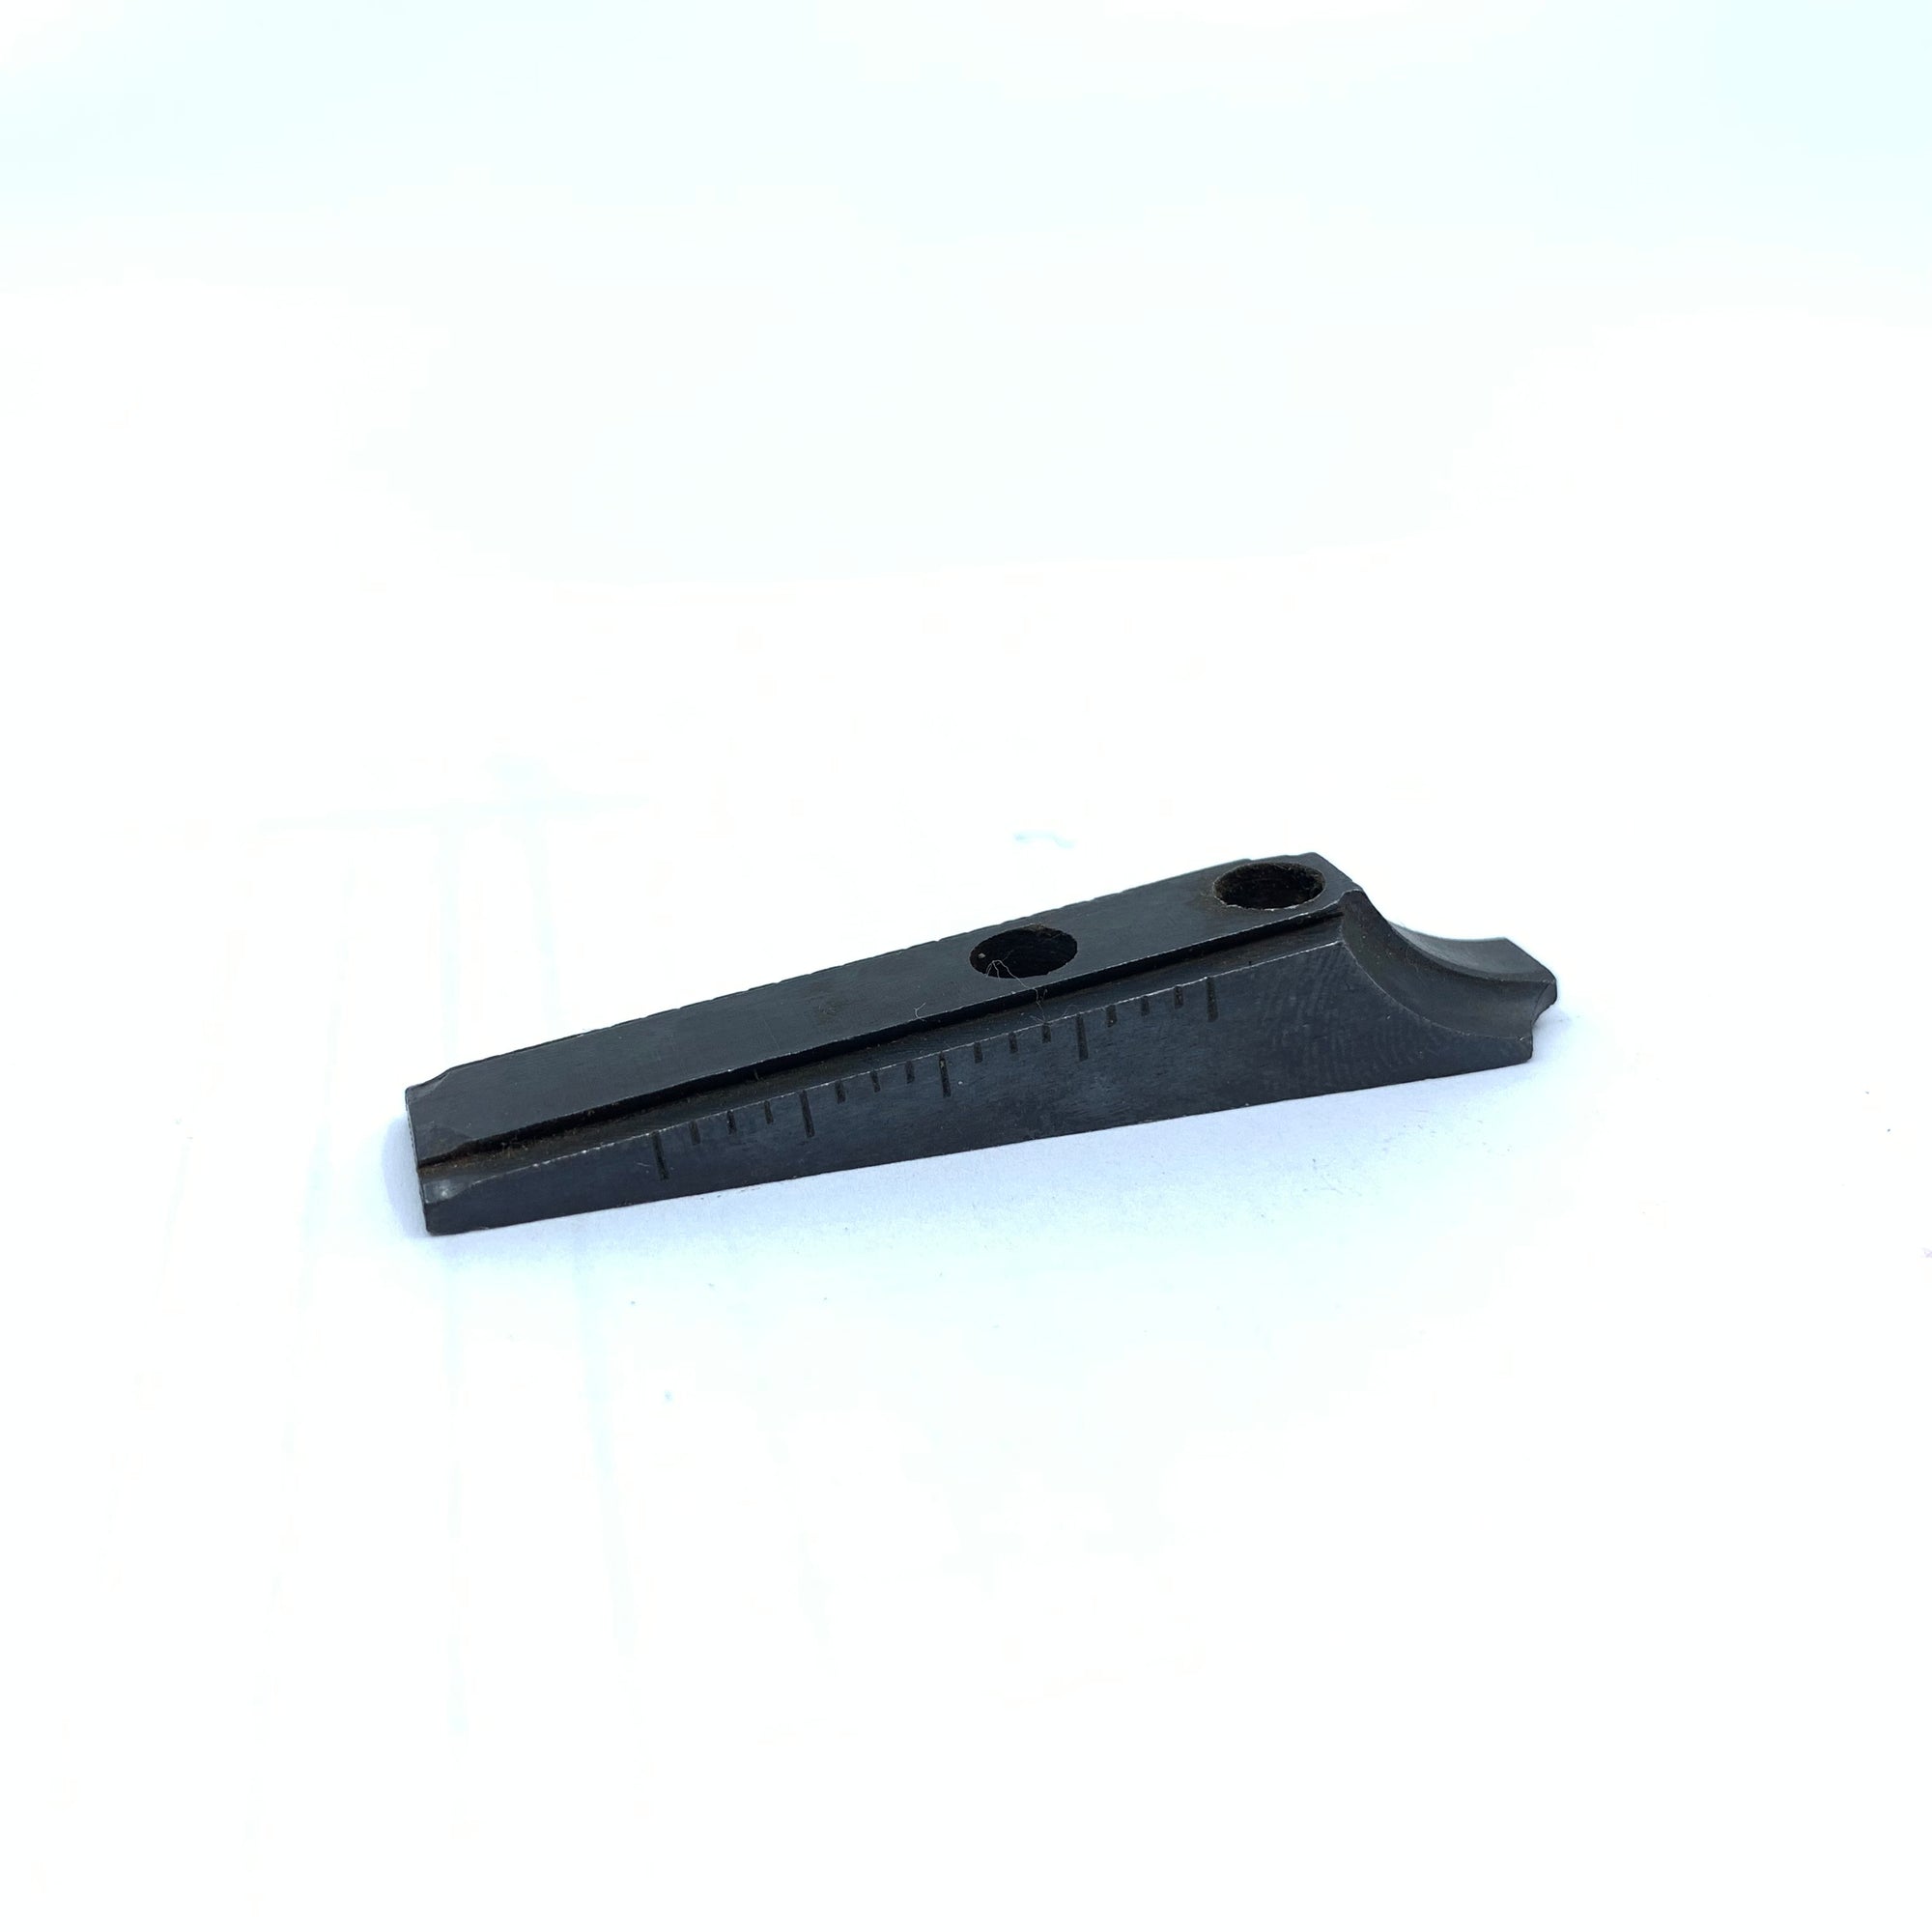 Remington Model 700 or 742 Rear Sight Ramp Only